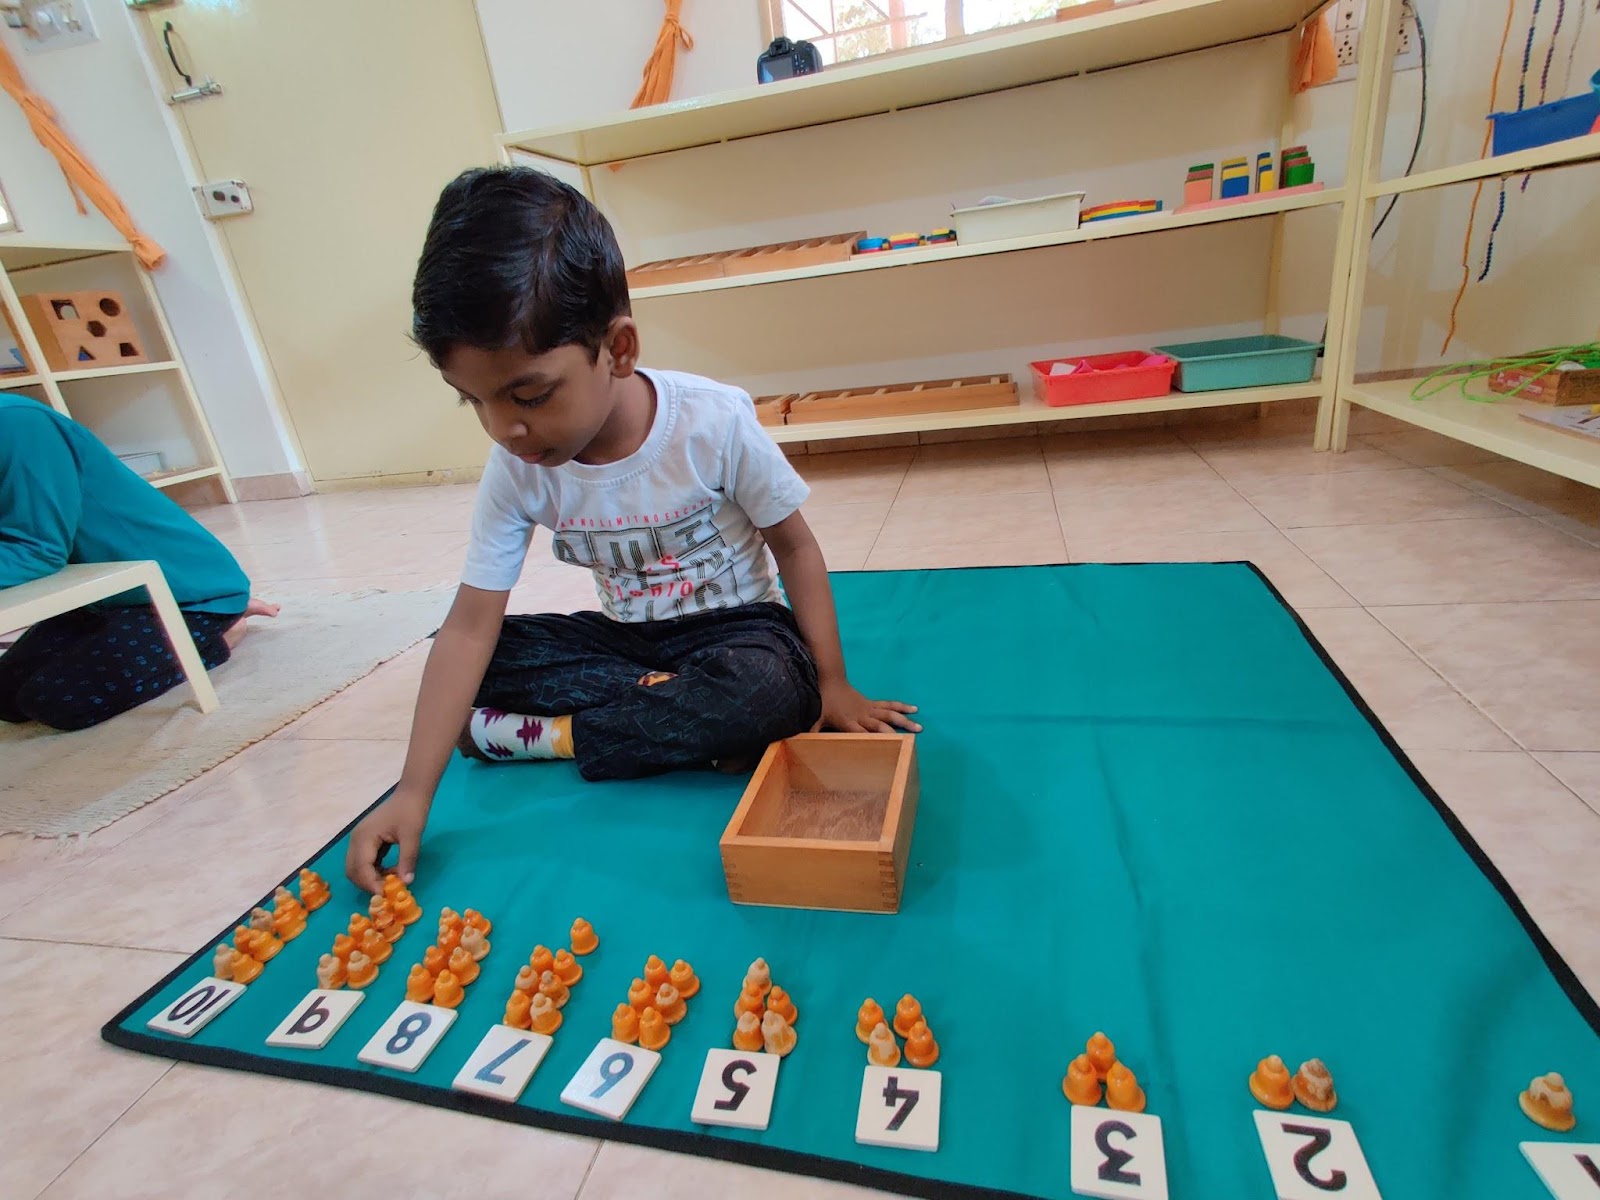 Child playing with number games - Montessori Materials